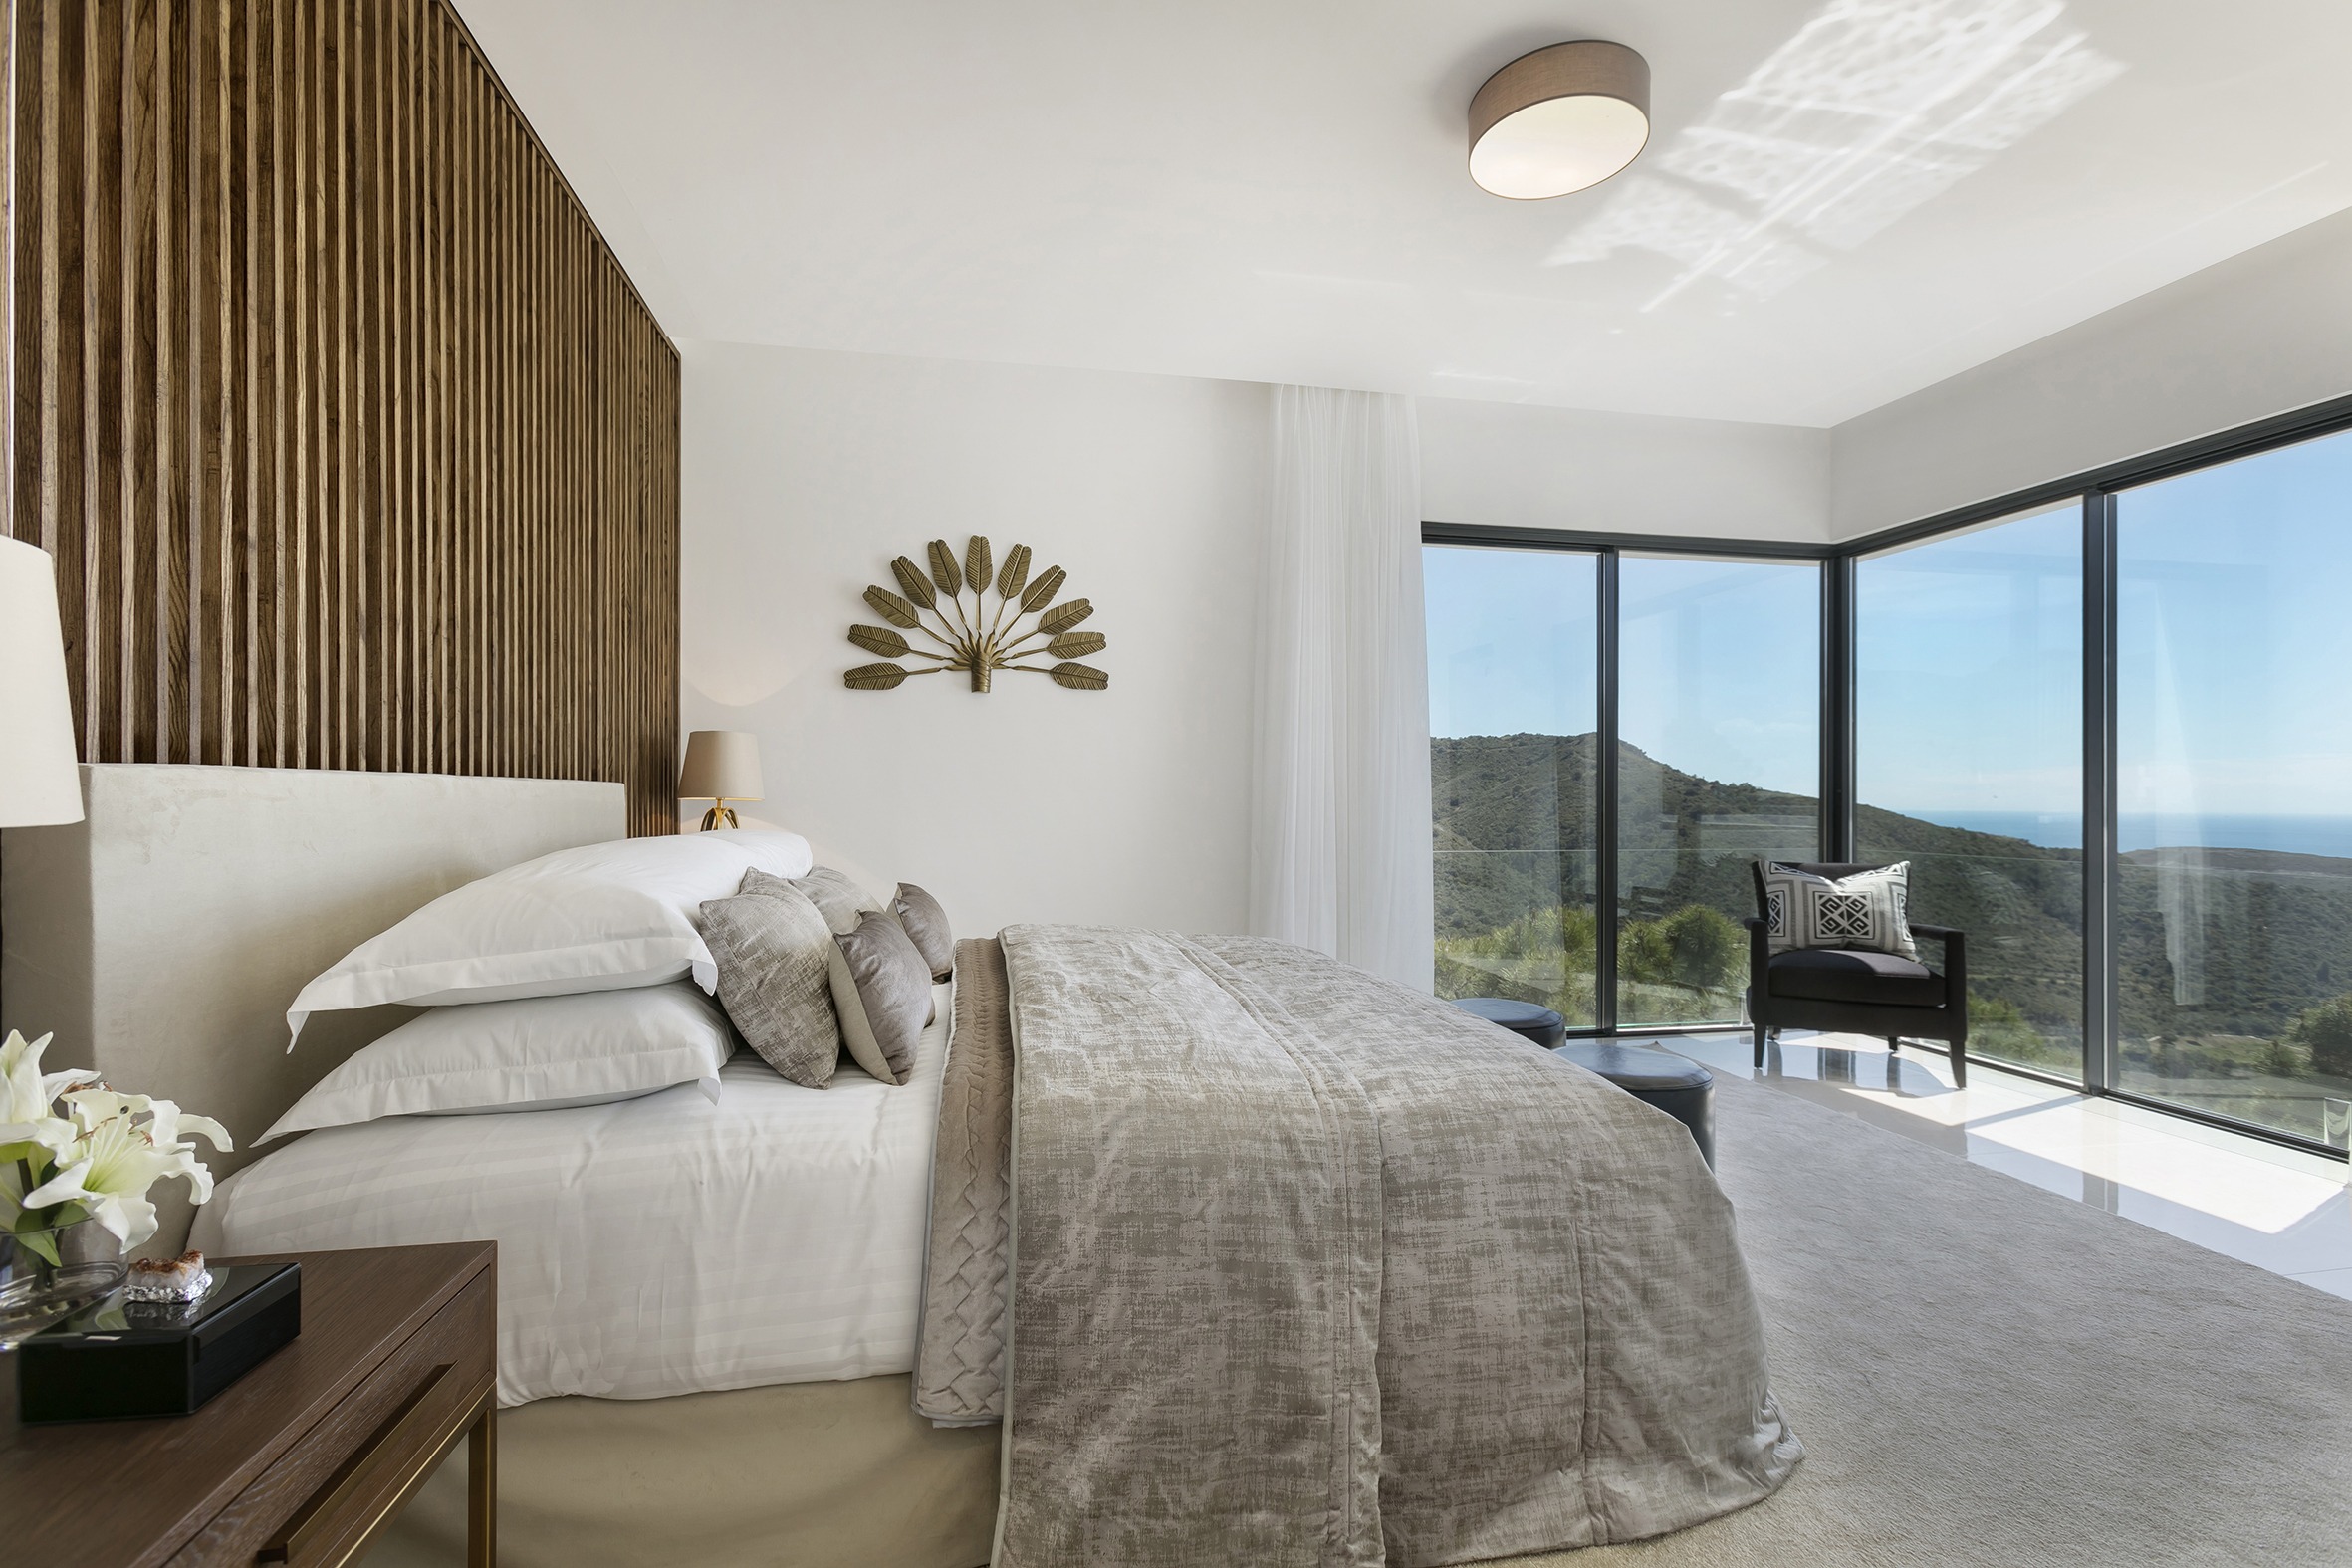 Master bedroom interior design with ocean view and wooden vertical lined wall with and gold - Original Interiors